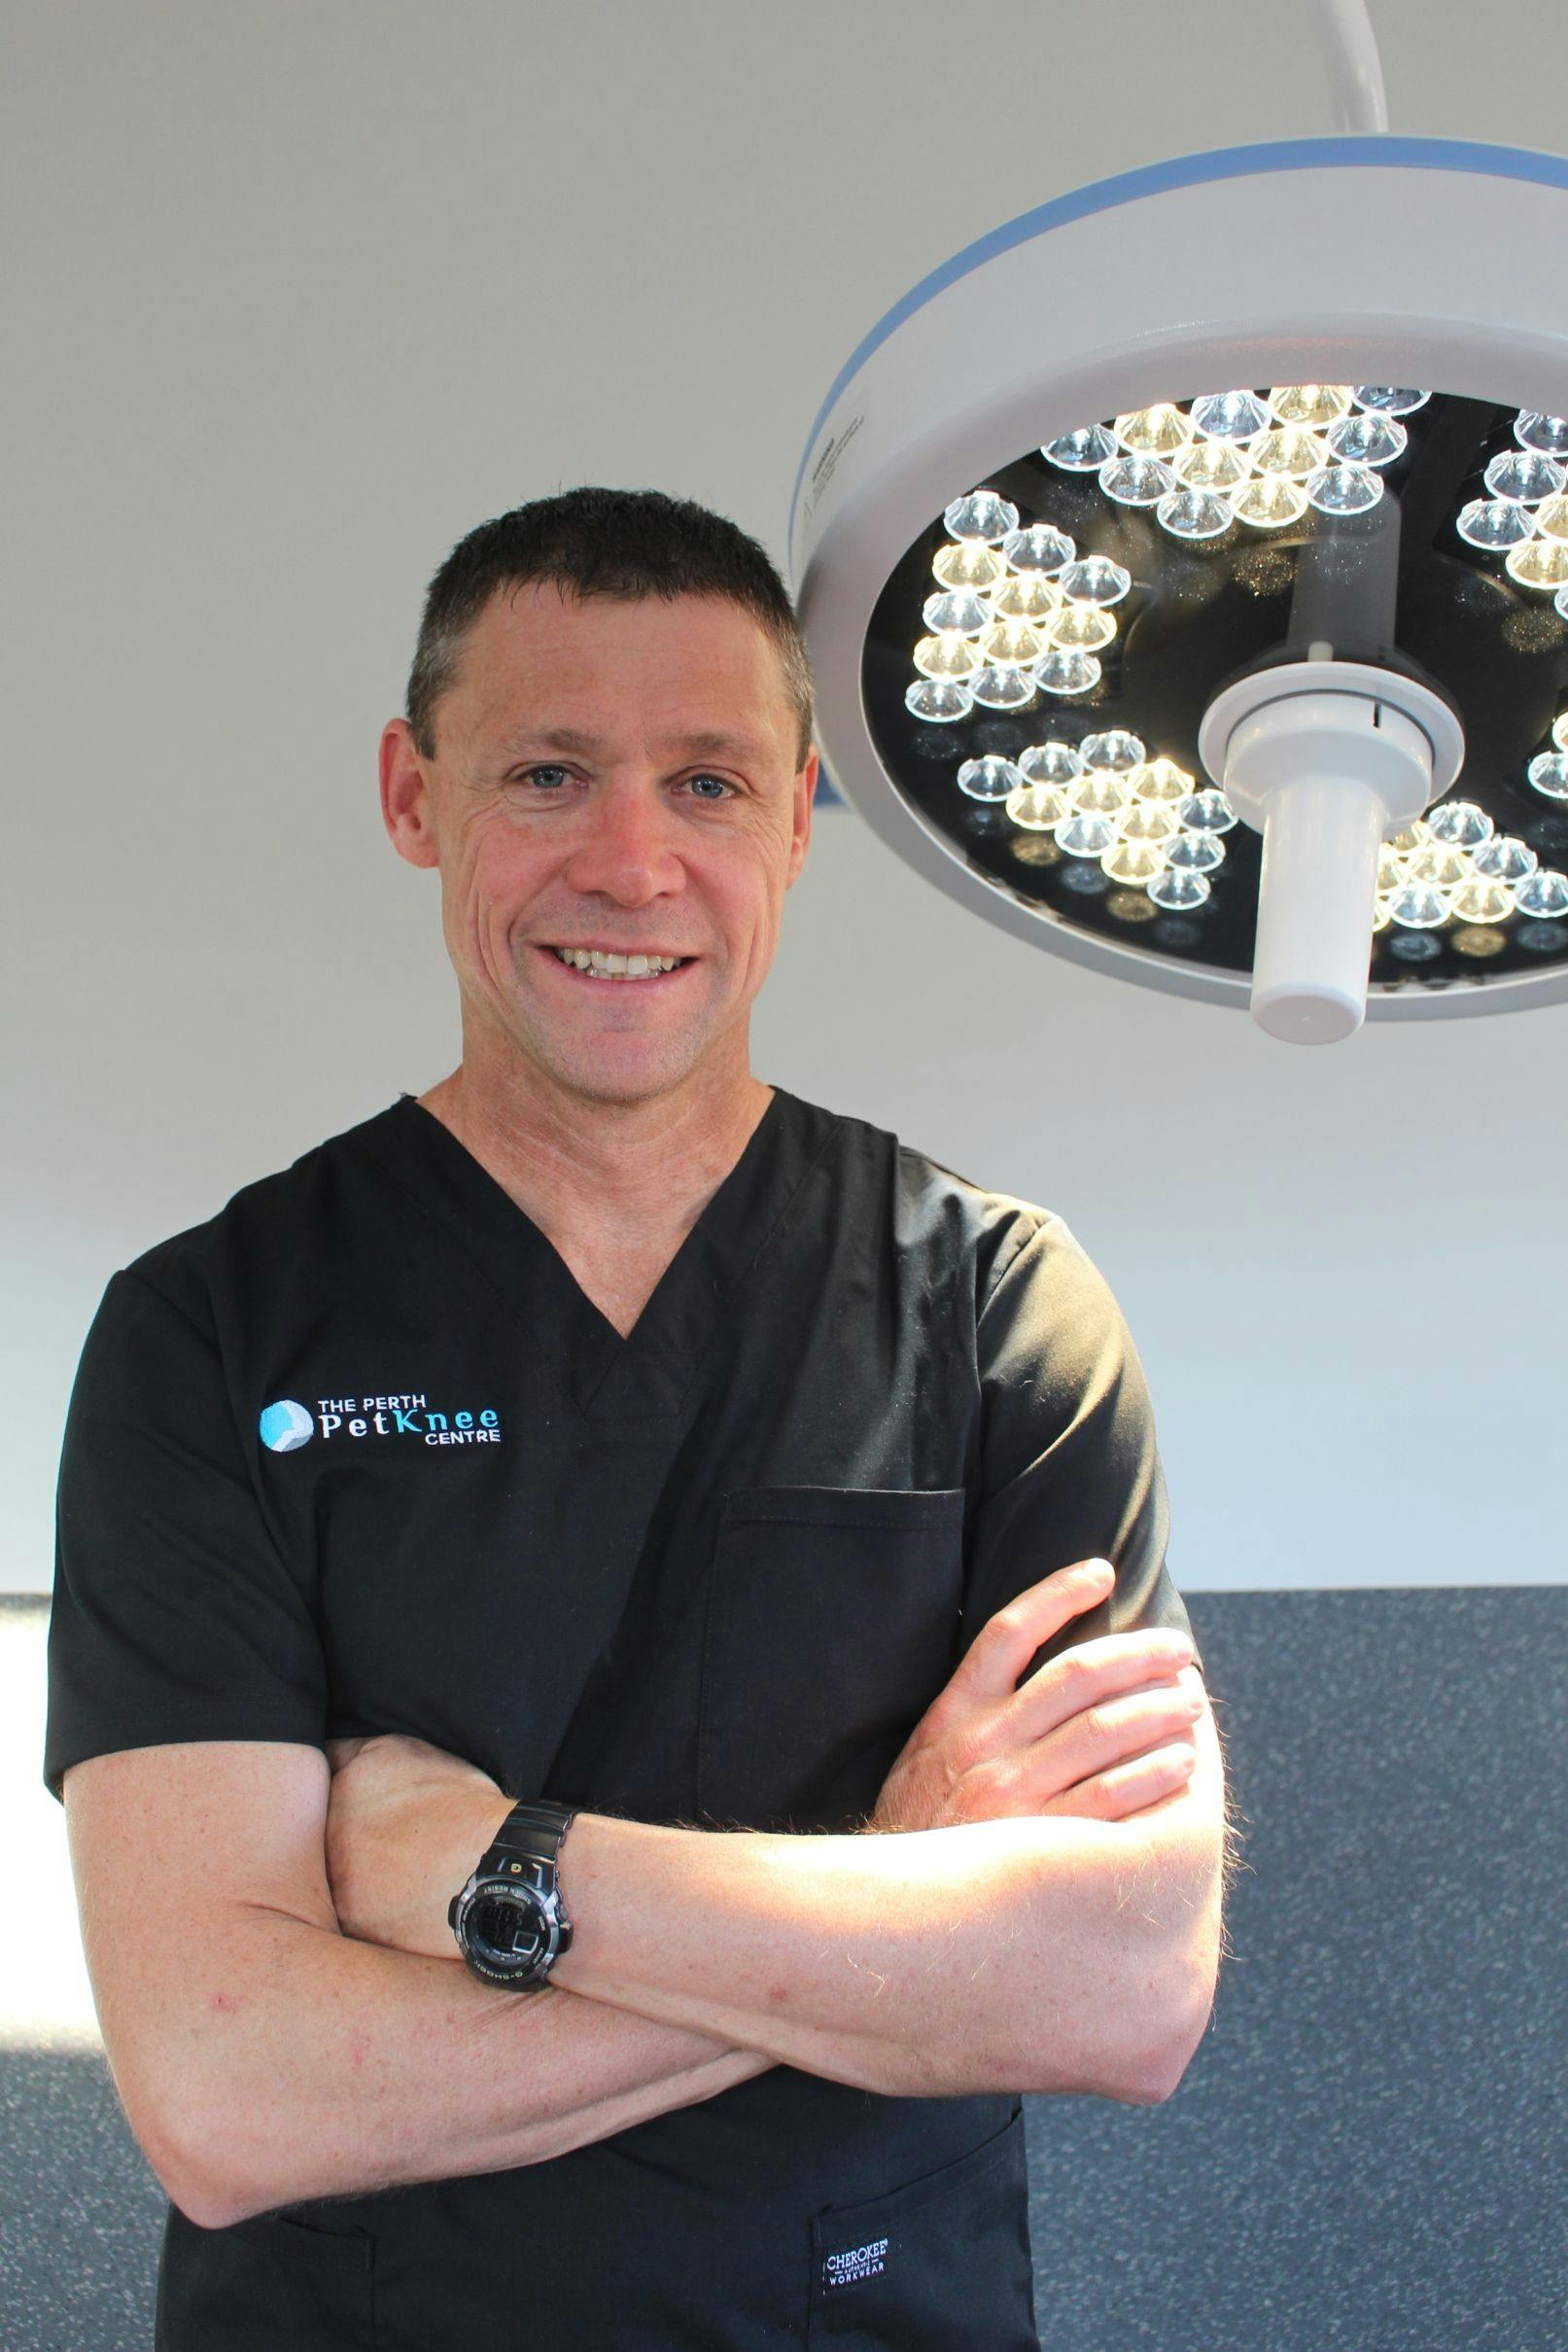 Chad Marriott, BSc, BVMS, MANZCVS (Small Animal Surgery), co-founder of The Perth Pet Knee Centre.